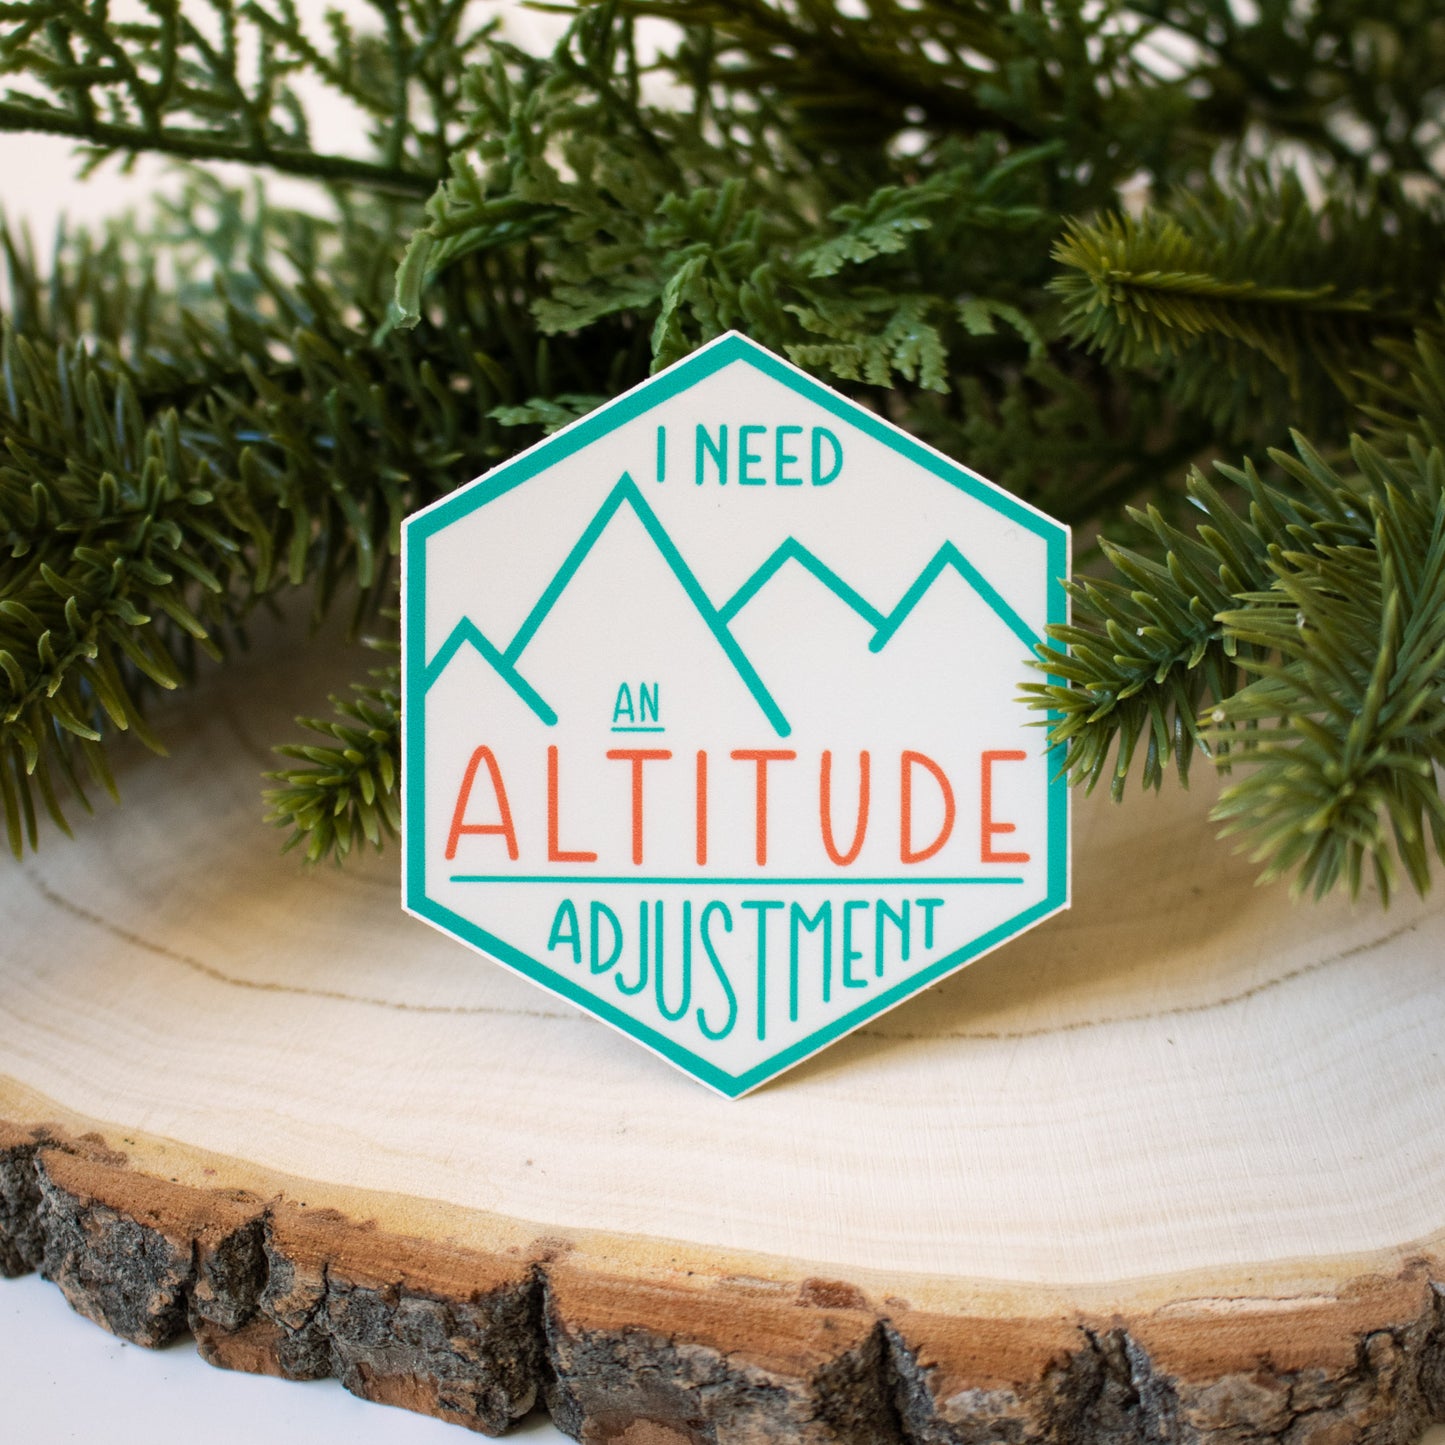 Simple line art mountain design with text "I need an altitude adjustment"  